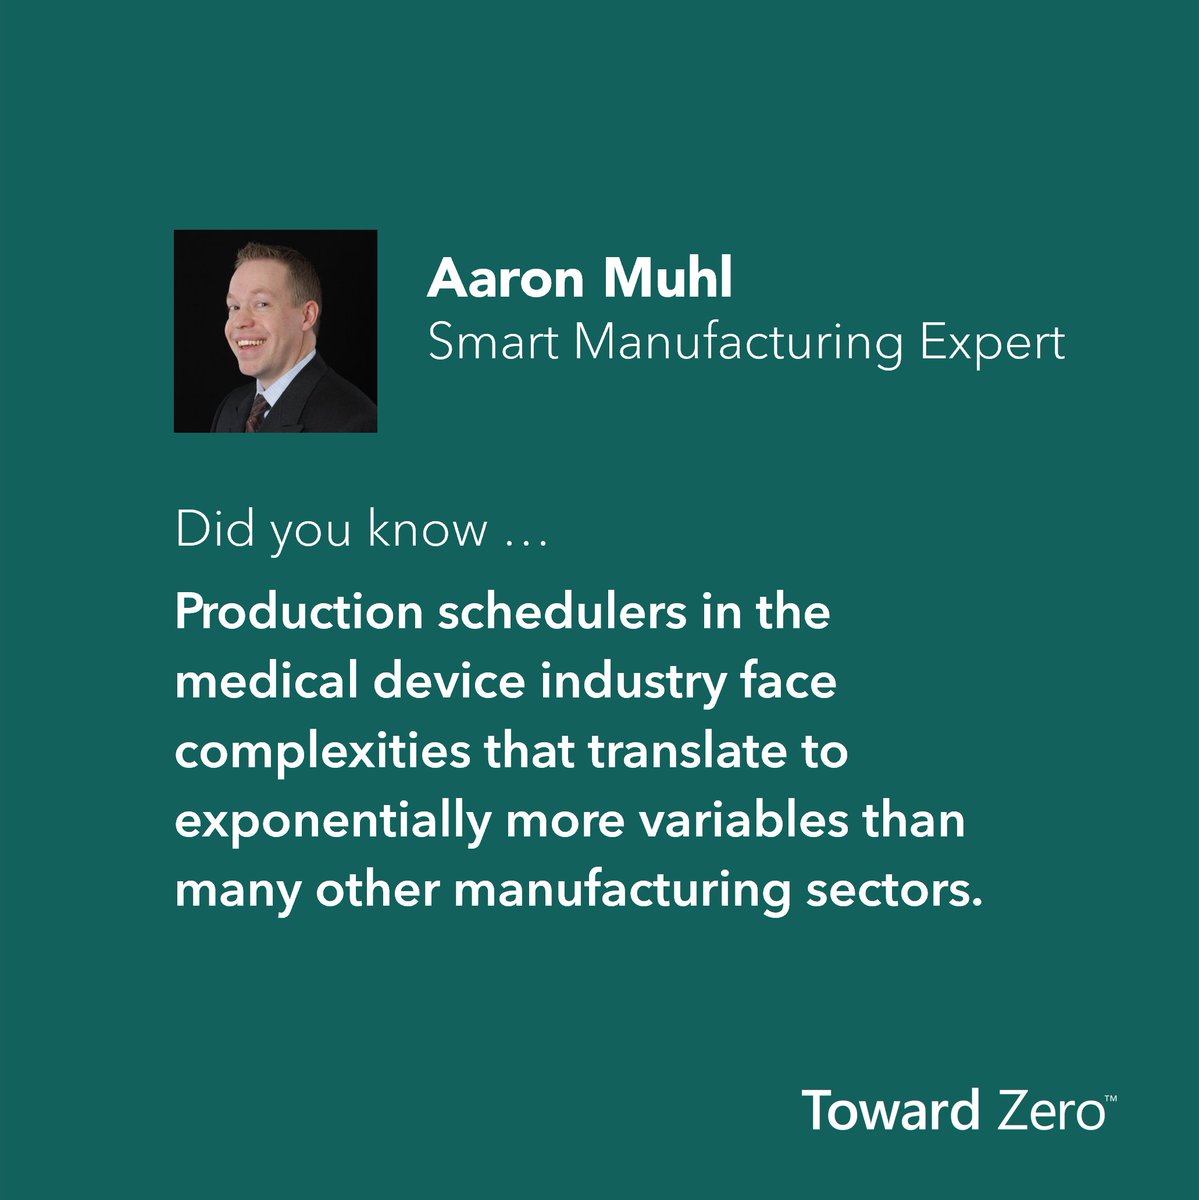 Just ask them about constraint modeling based on material availability! hubs.ly/Q01hwygk0
🤔🏭🤔🏭🤔
#industry40 #SmartManufacturing
#PlanetTogether #PlanningScheduling #ProductionPlanning
#ManufacturingOperations #OperationalExcellence